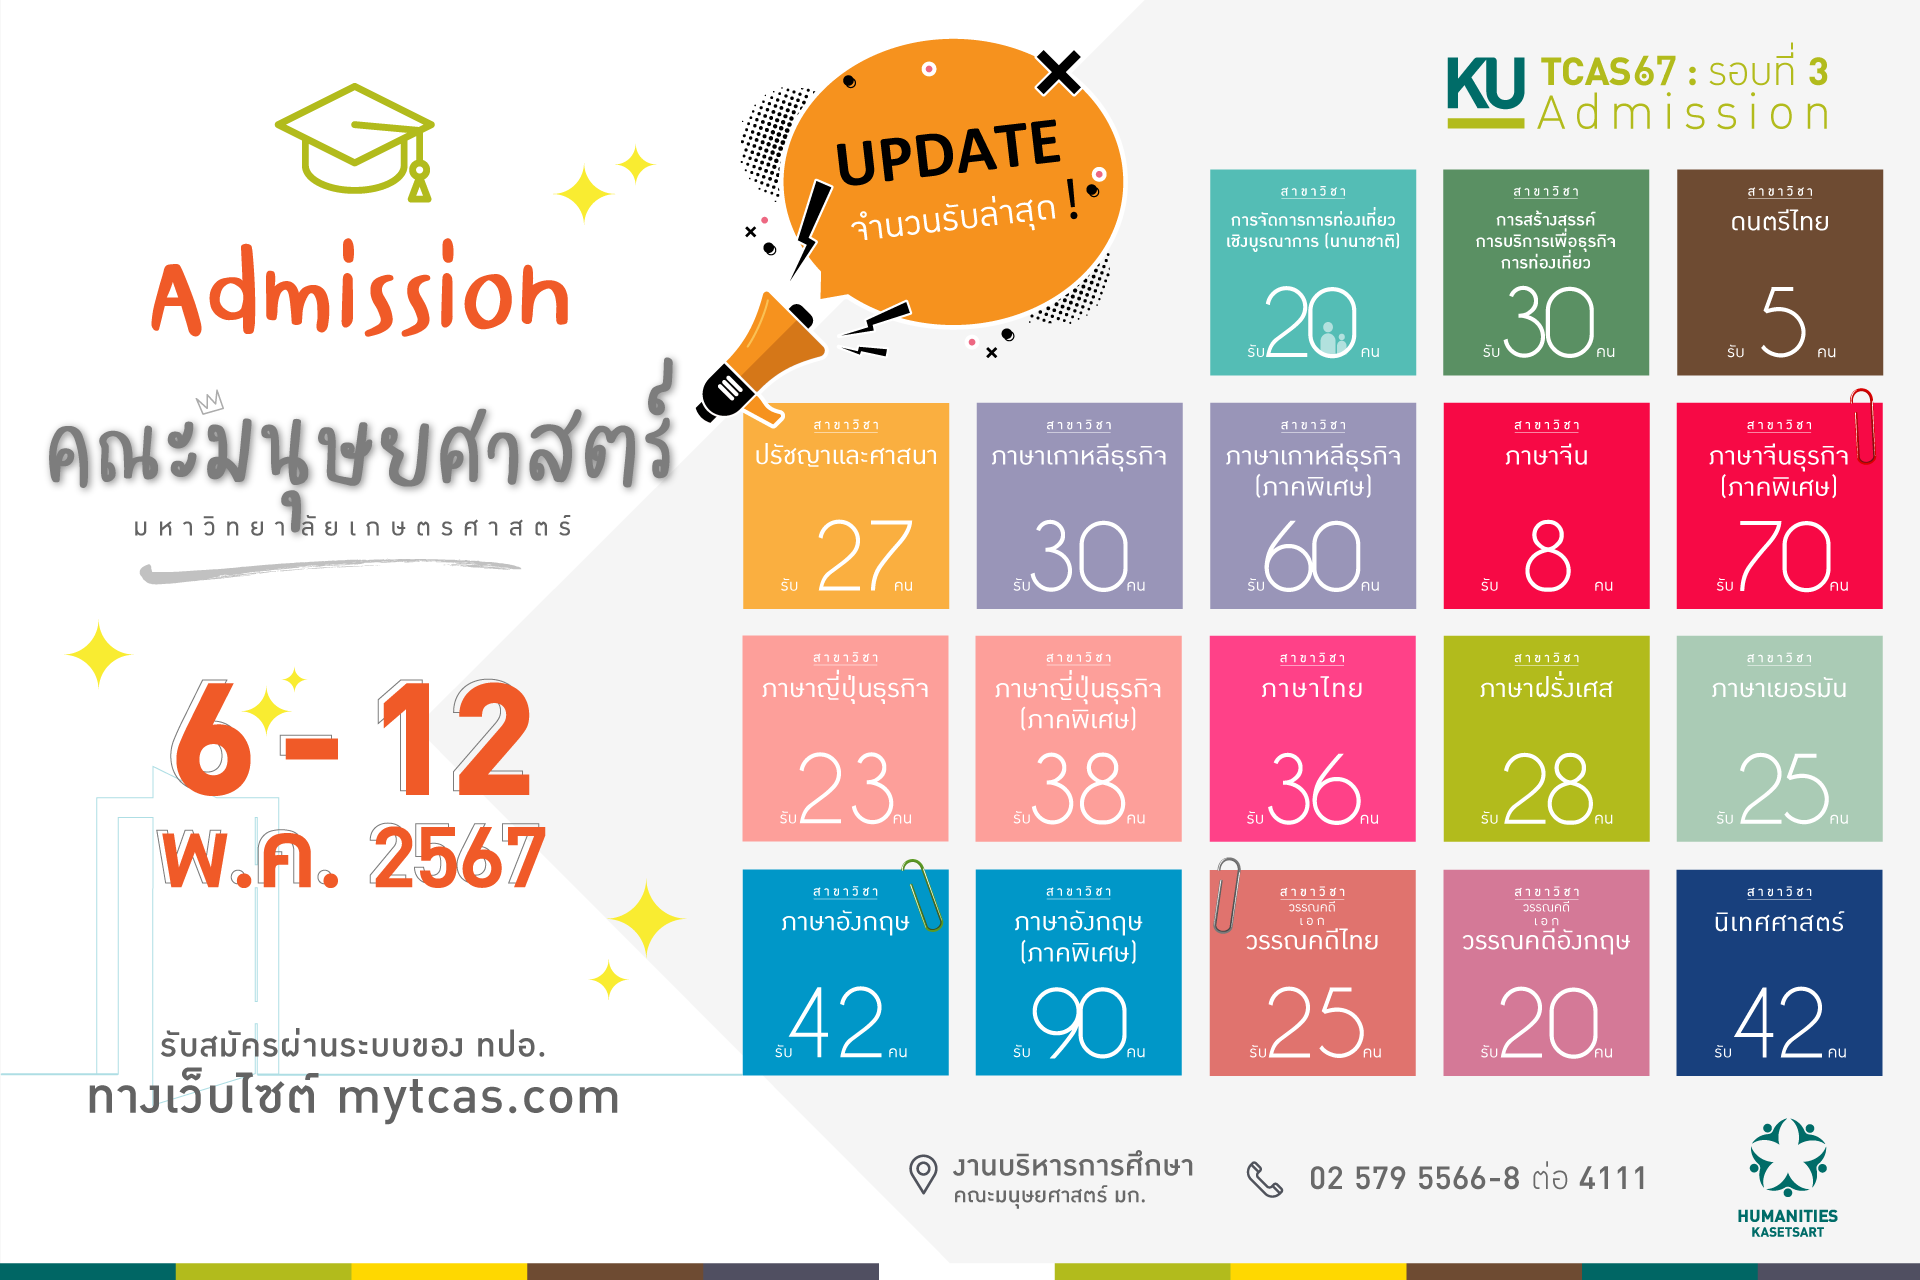 Featured image for “Admission คณะมนุษยศาสตร์ 6-12 พ.ค.67”